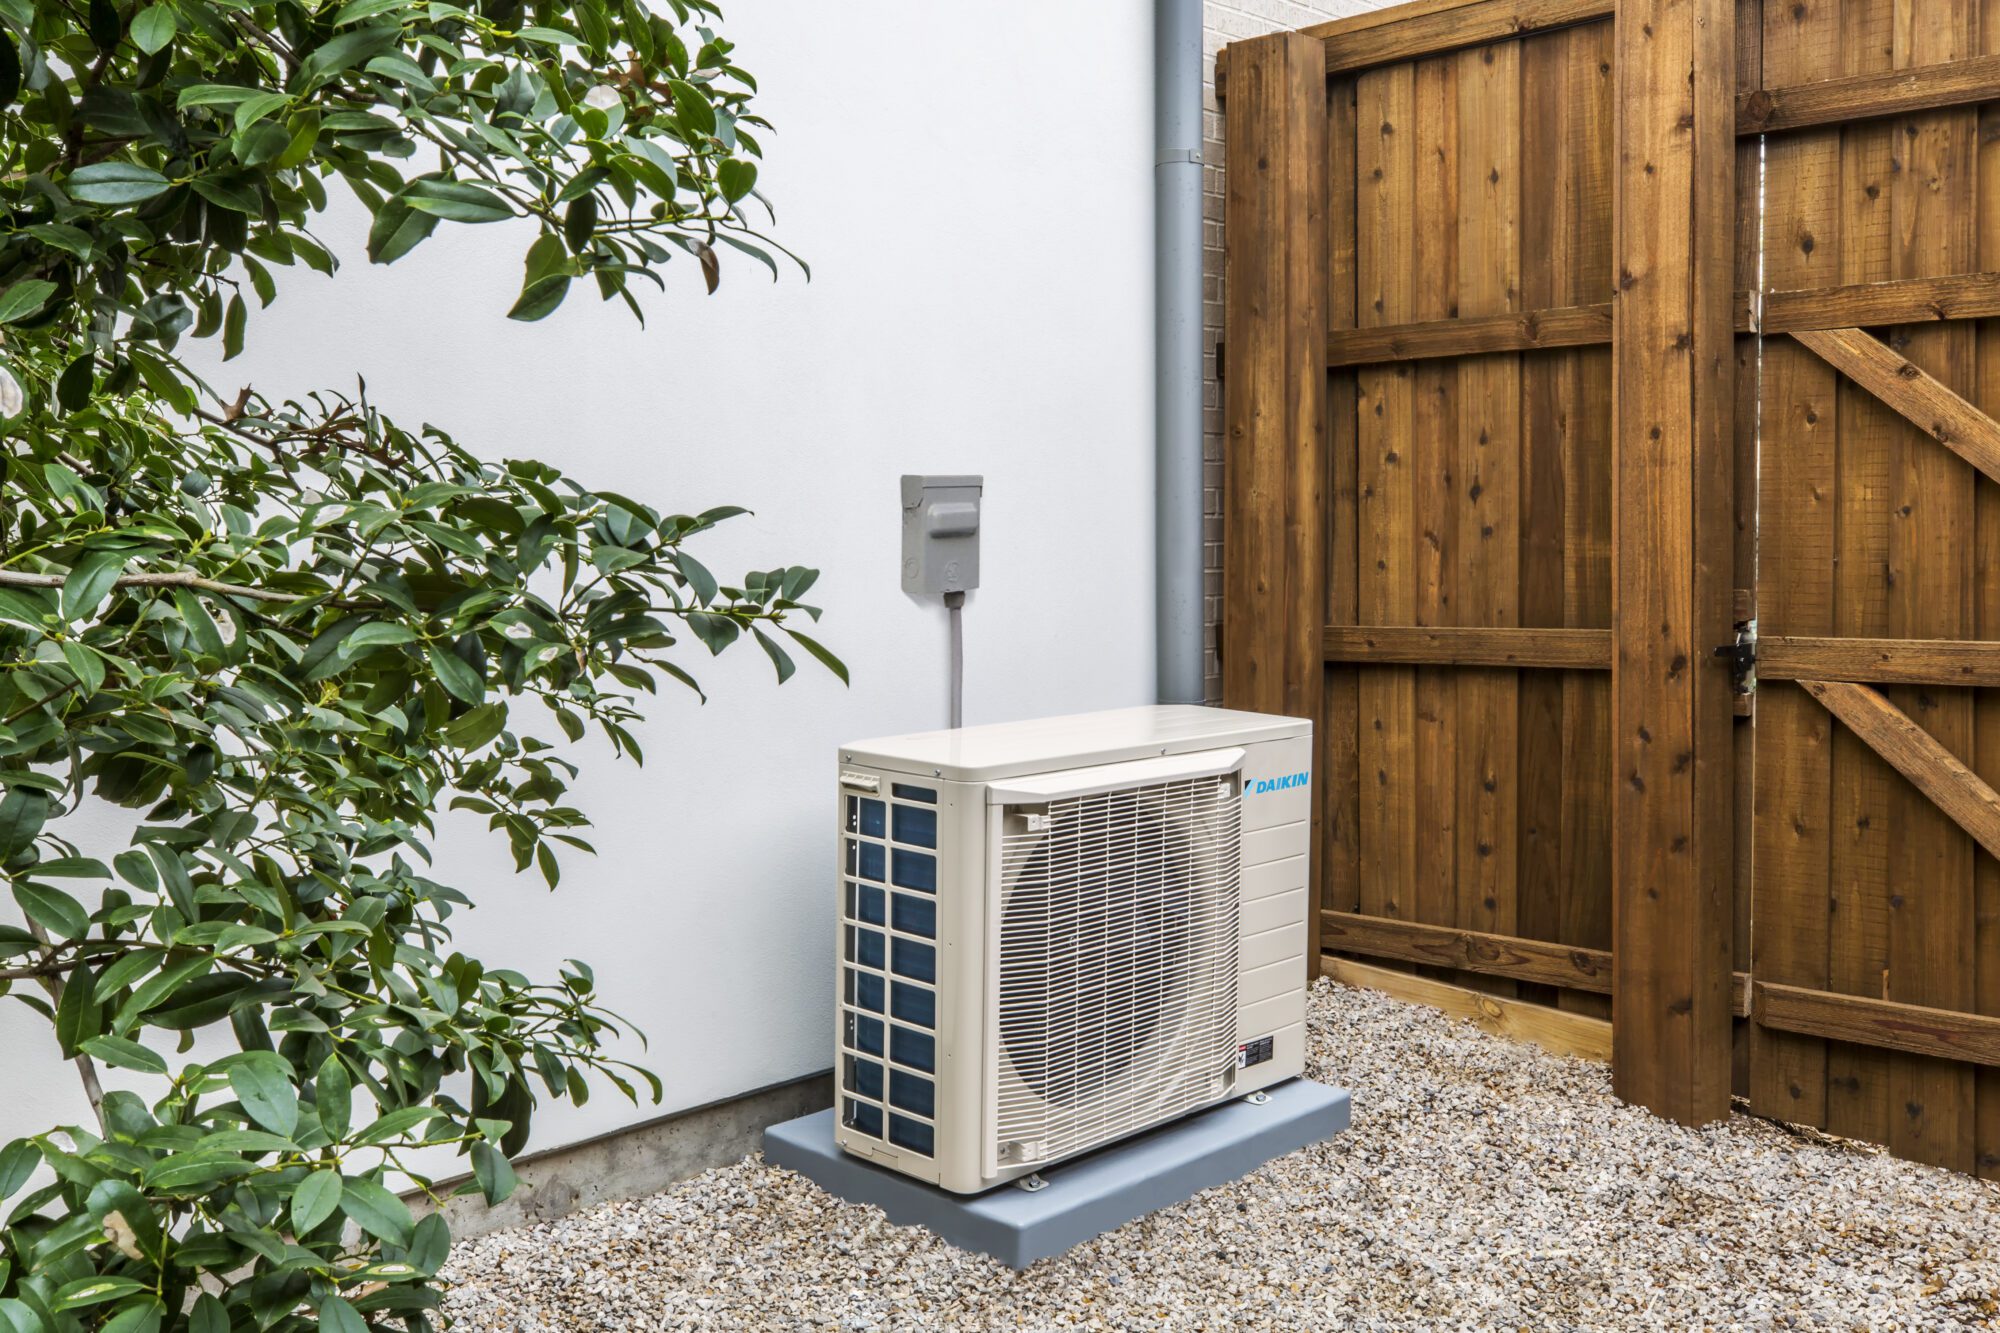 Daikin Fit AC Unit in small space